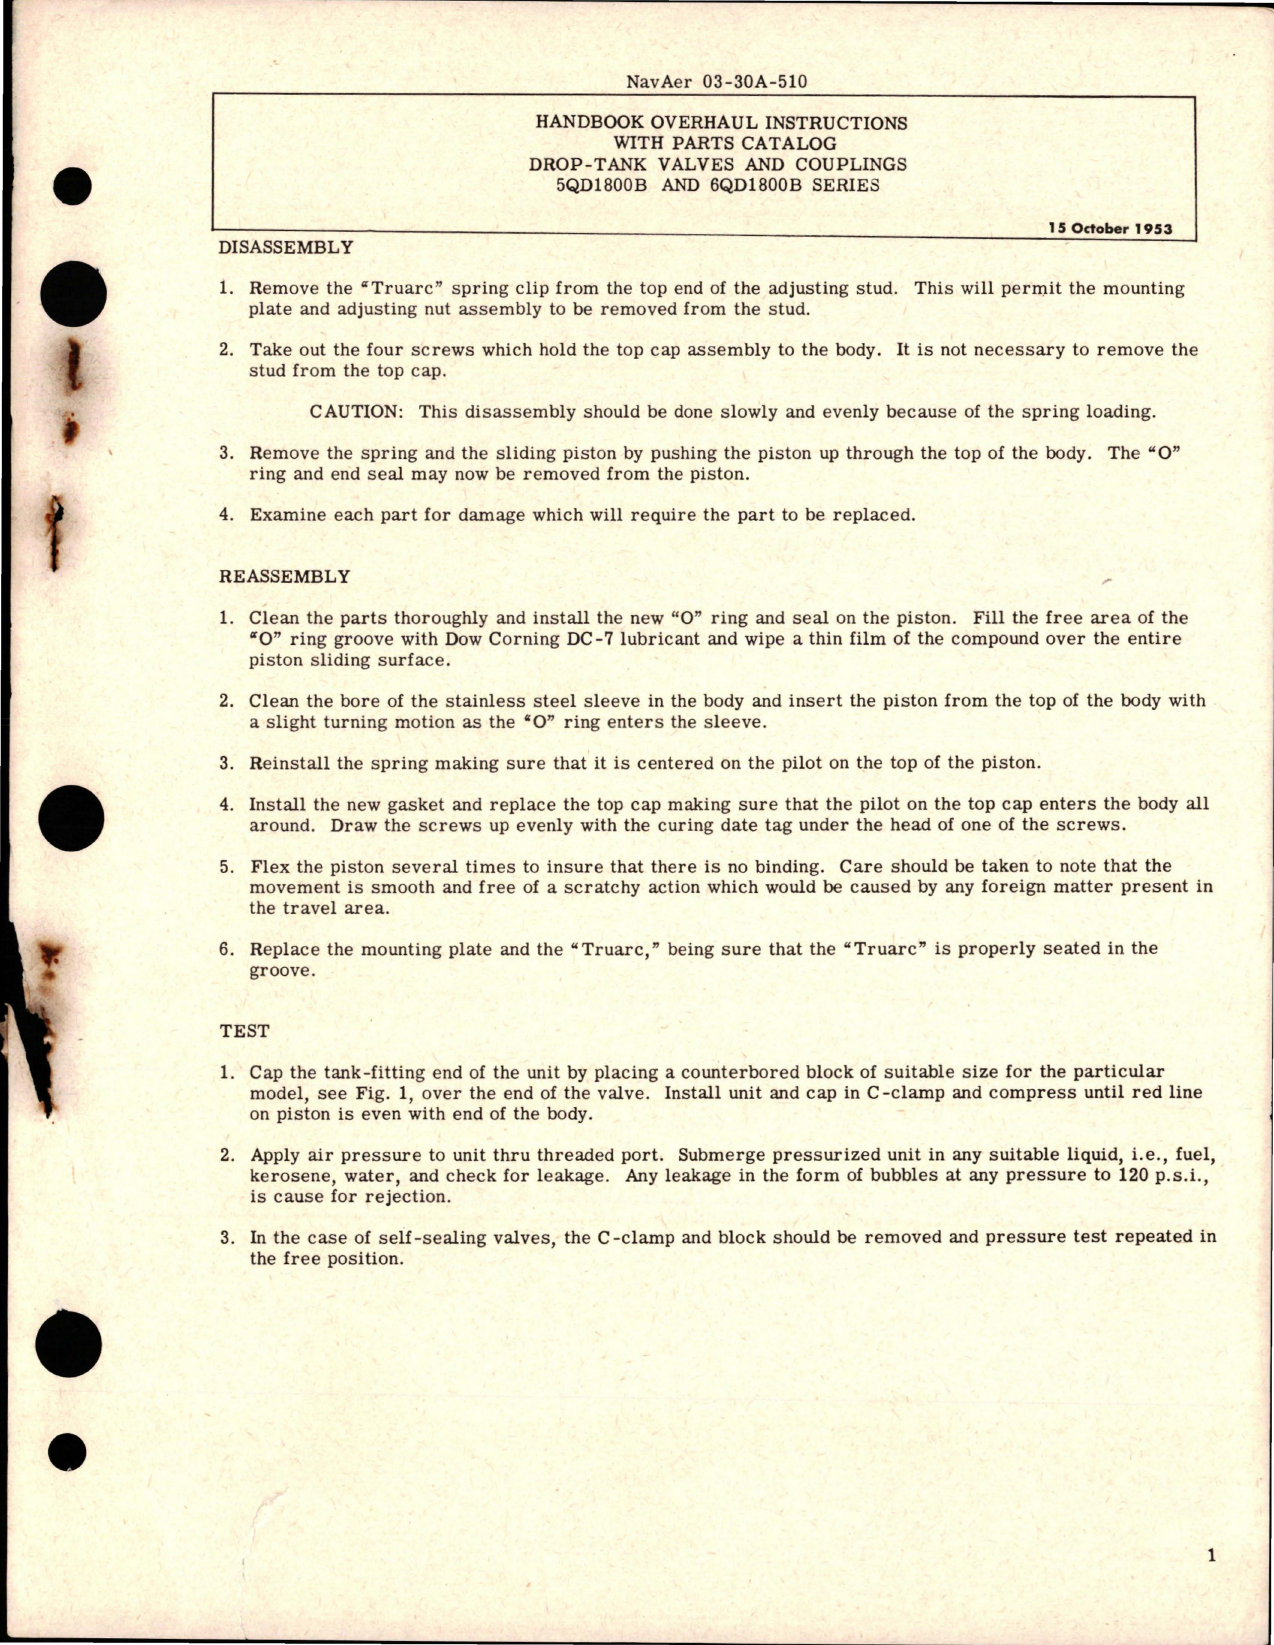 Sample page 1 from AirCorps Library document: Overhaul Instructions with Parts Catalog for Drop-Tank Valves and Couplings - 5QD1800B and 6QD1800E Series